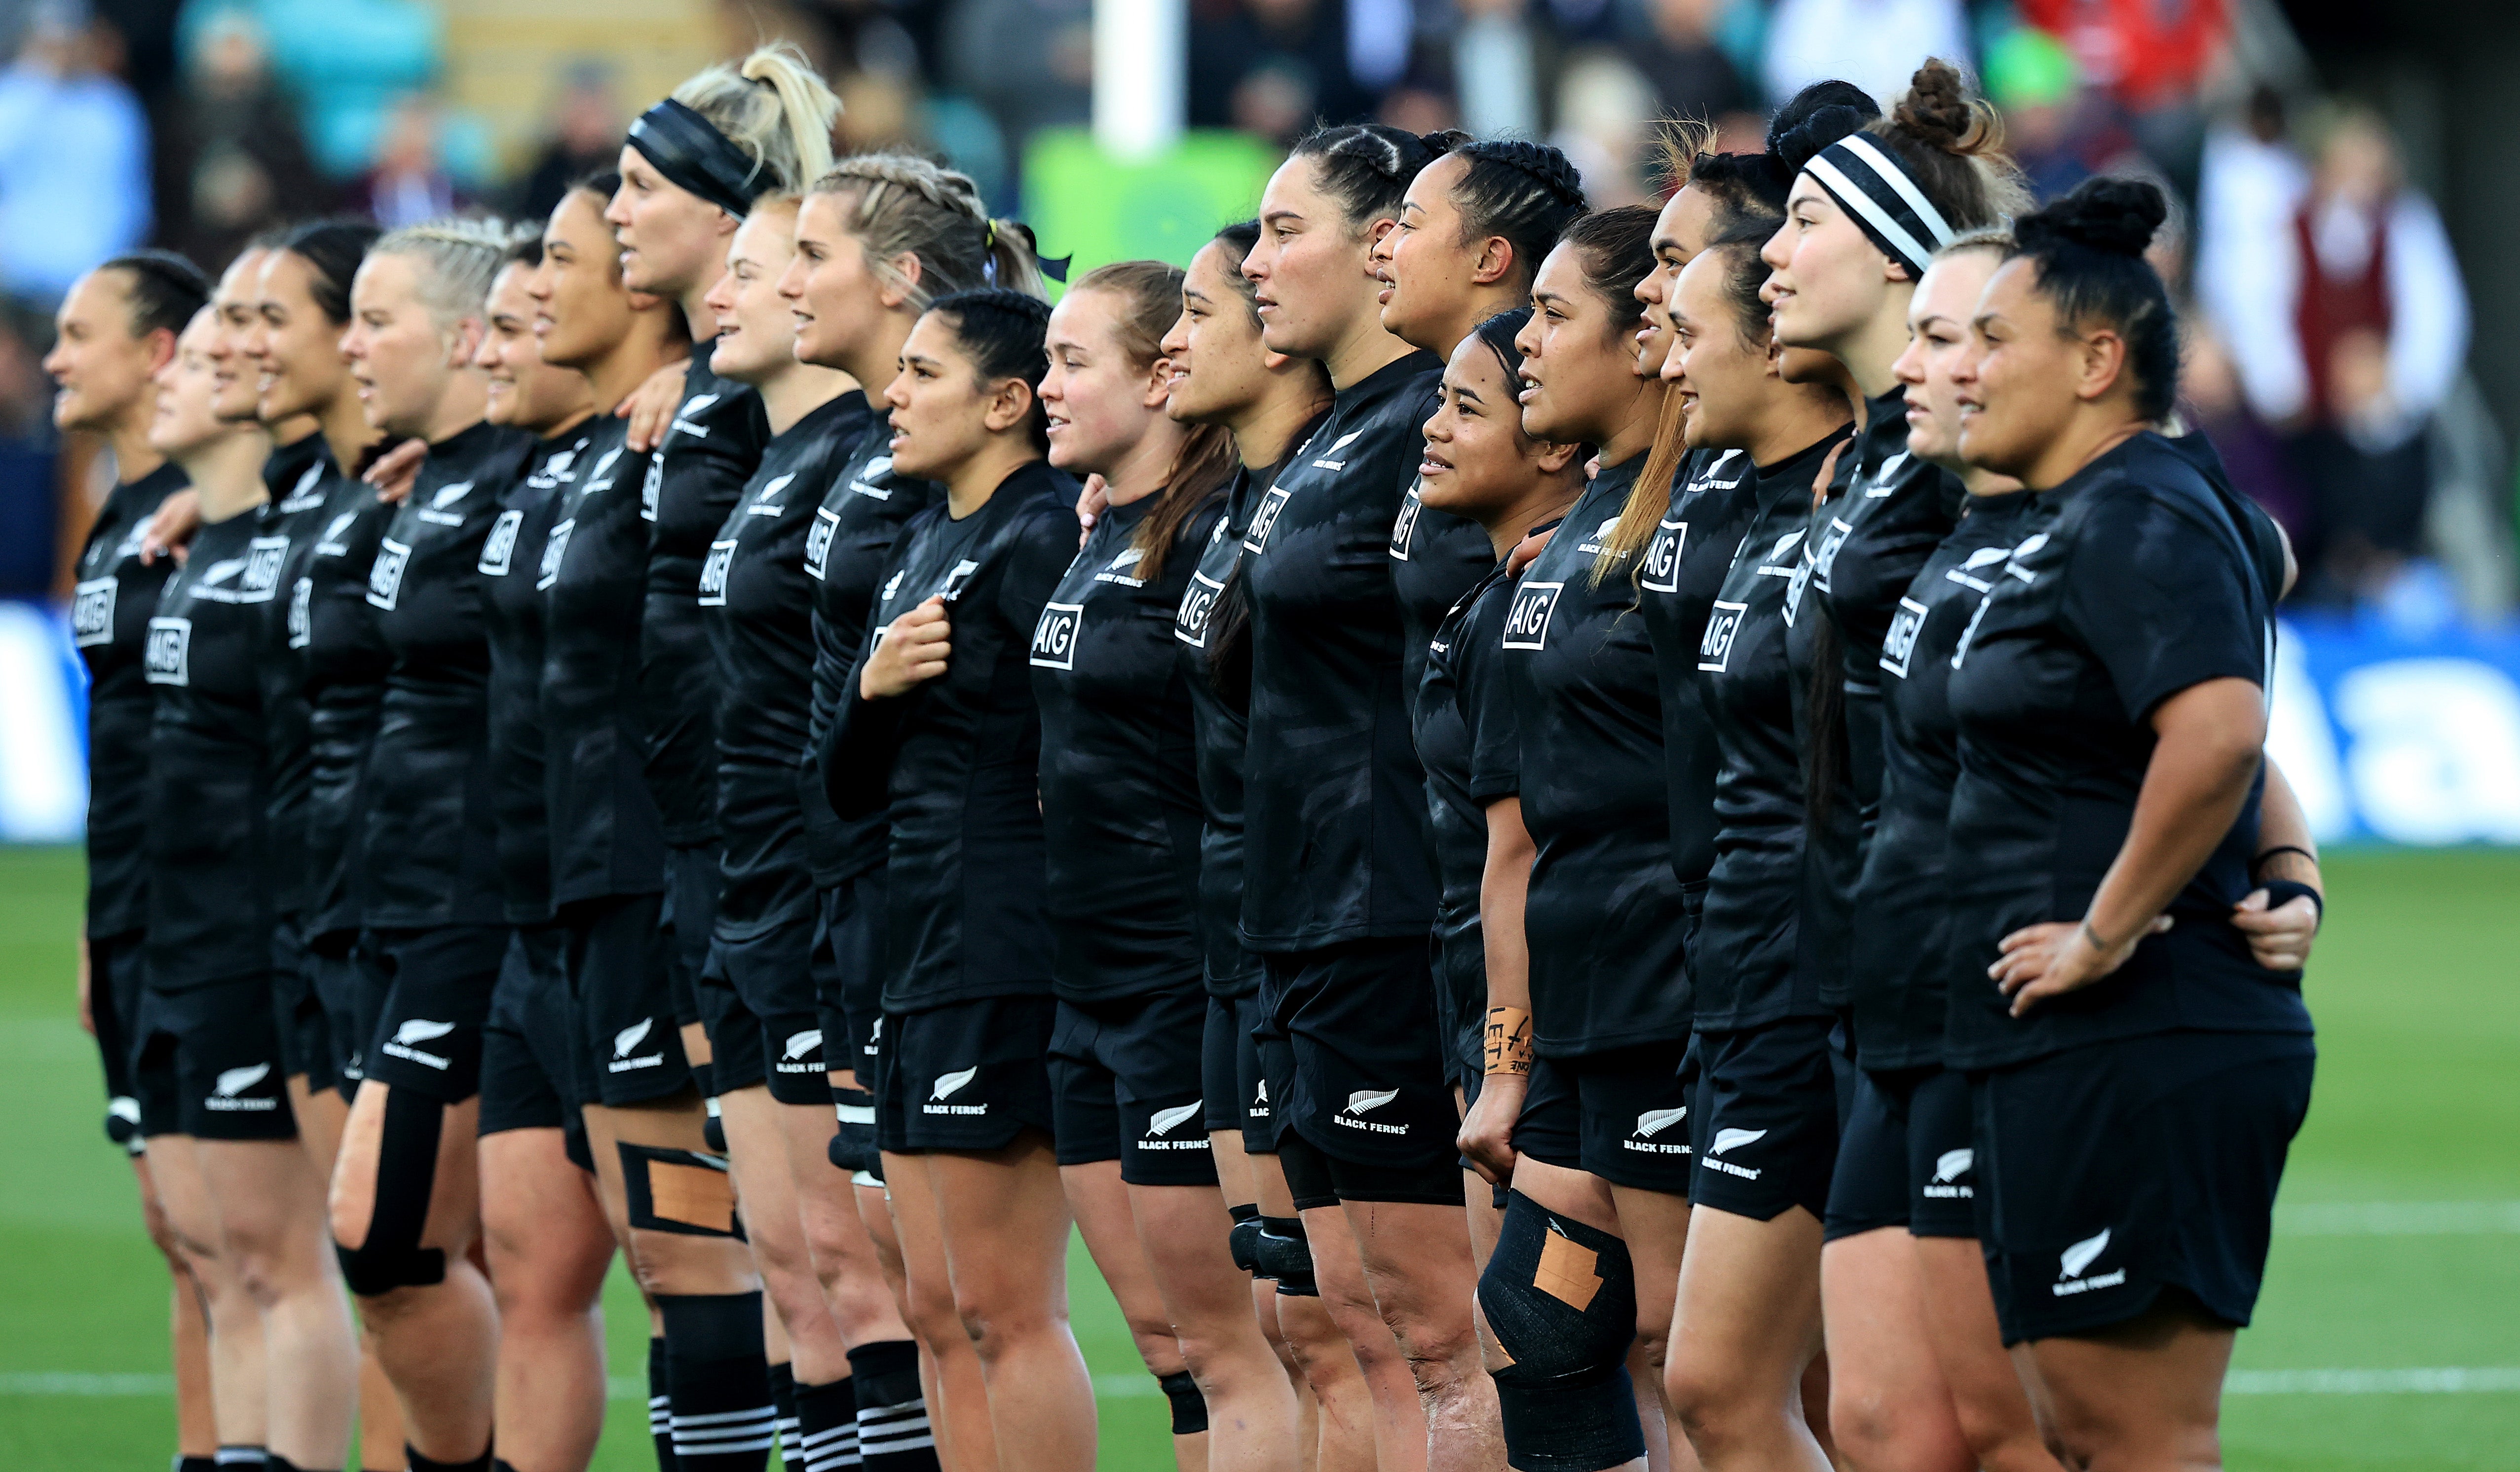 The New Zealand women’s team line up before a match against England